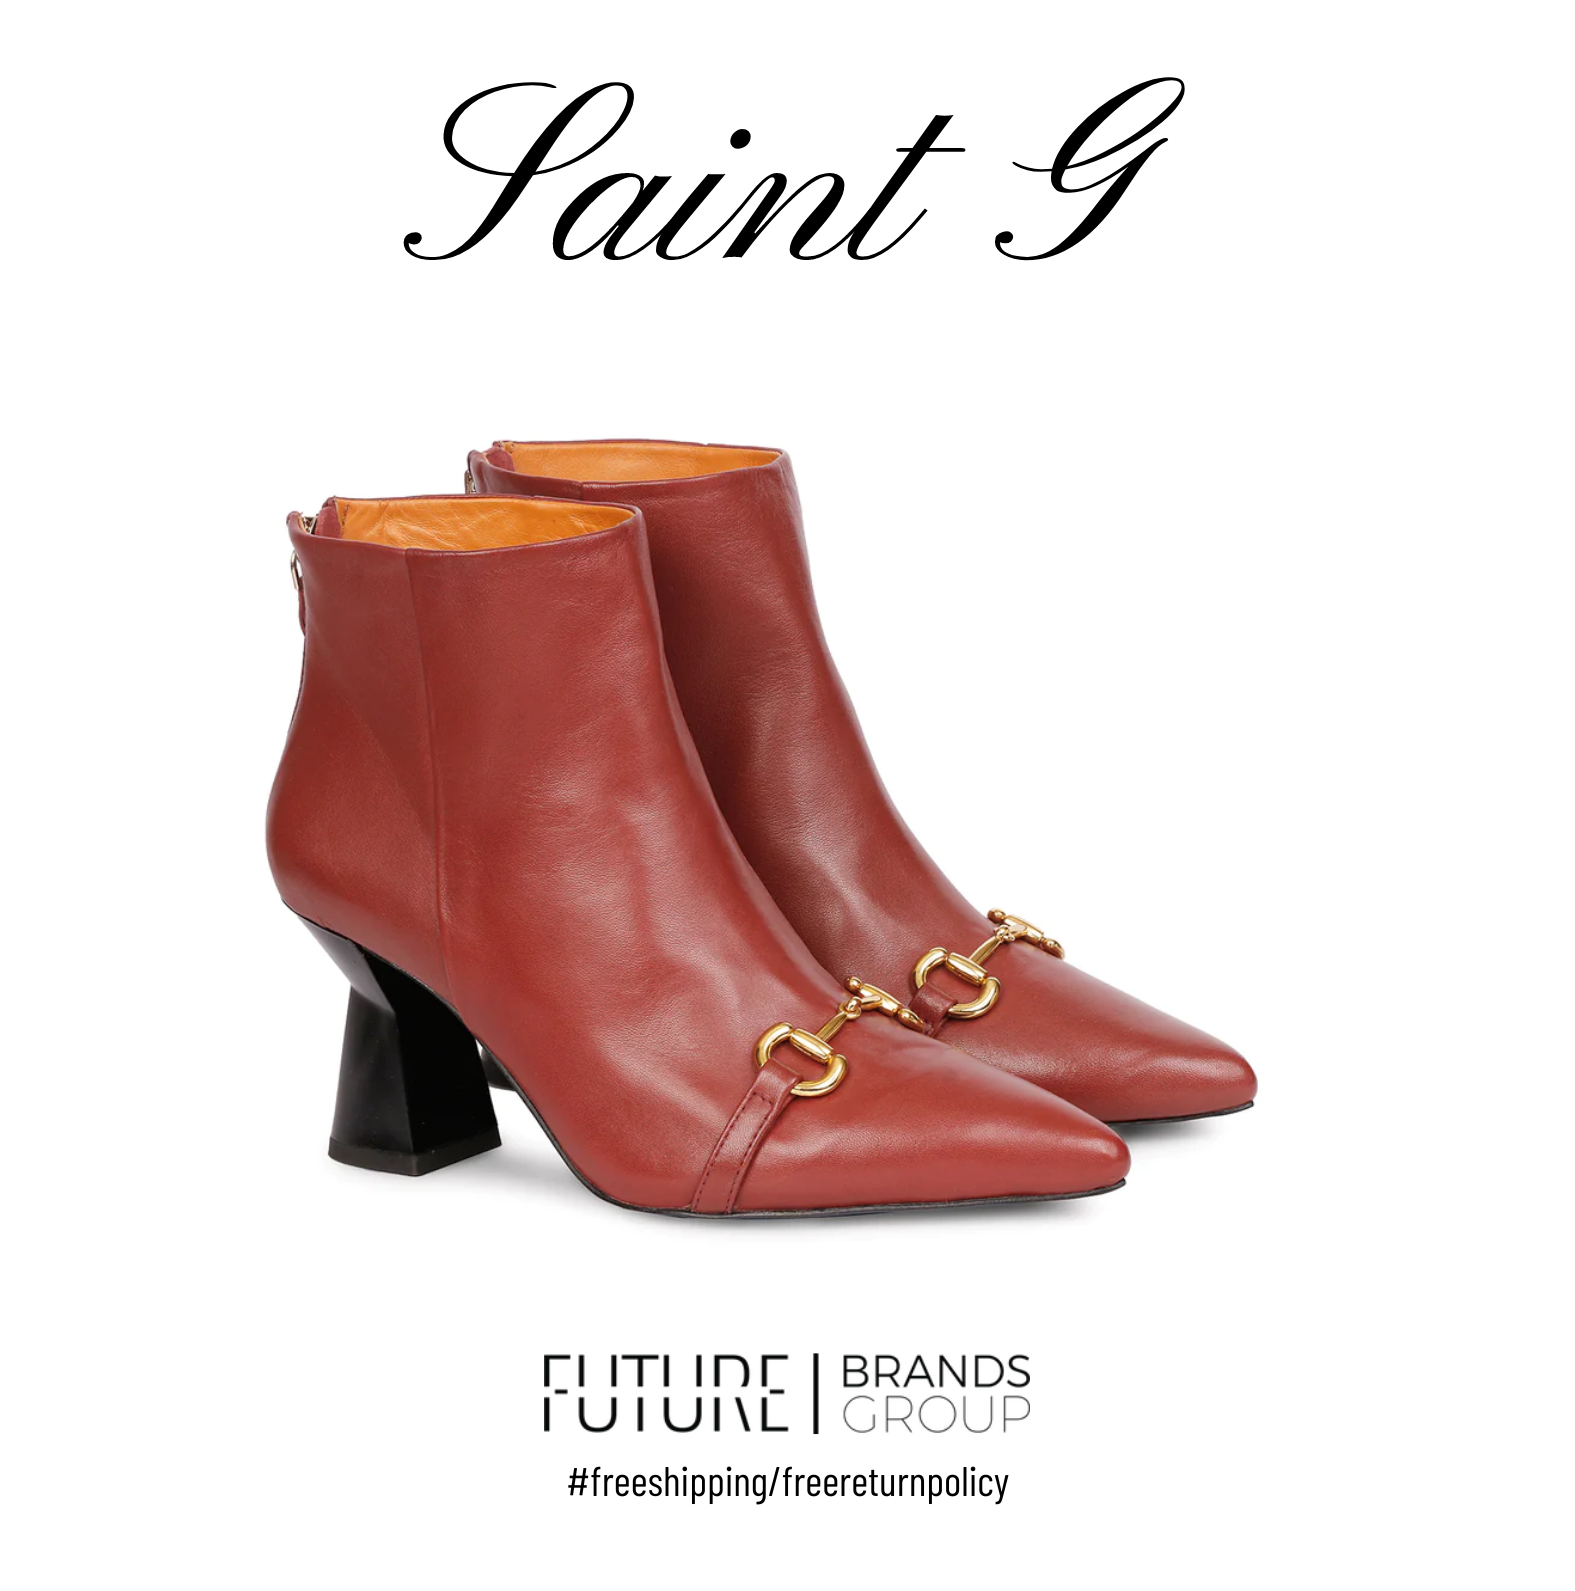 Ashley Rusty Leather Ankle Boots | Saint G | Future Brands Group